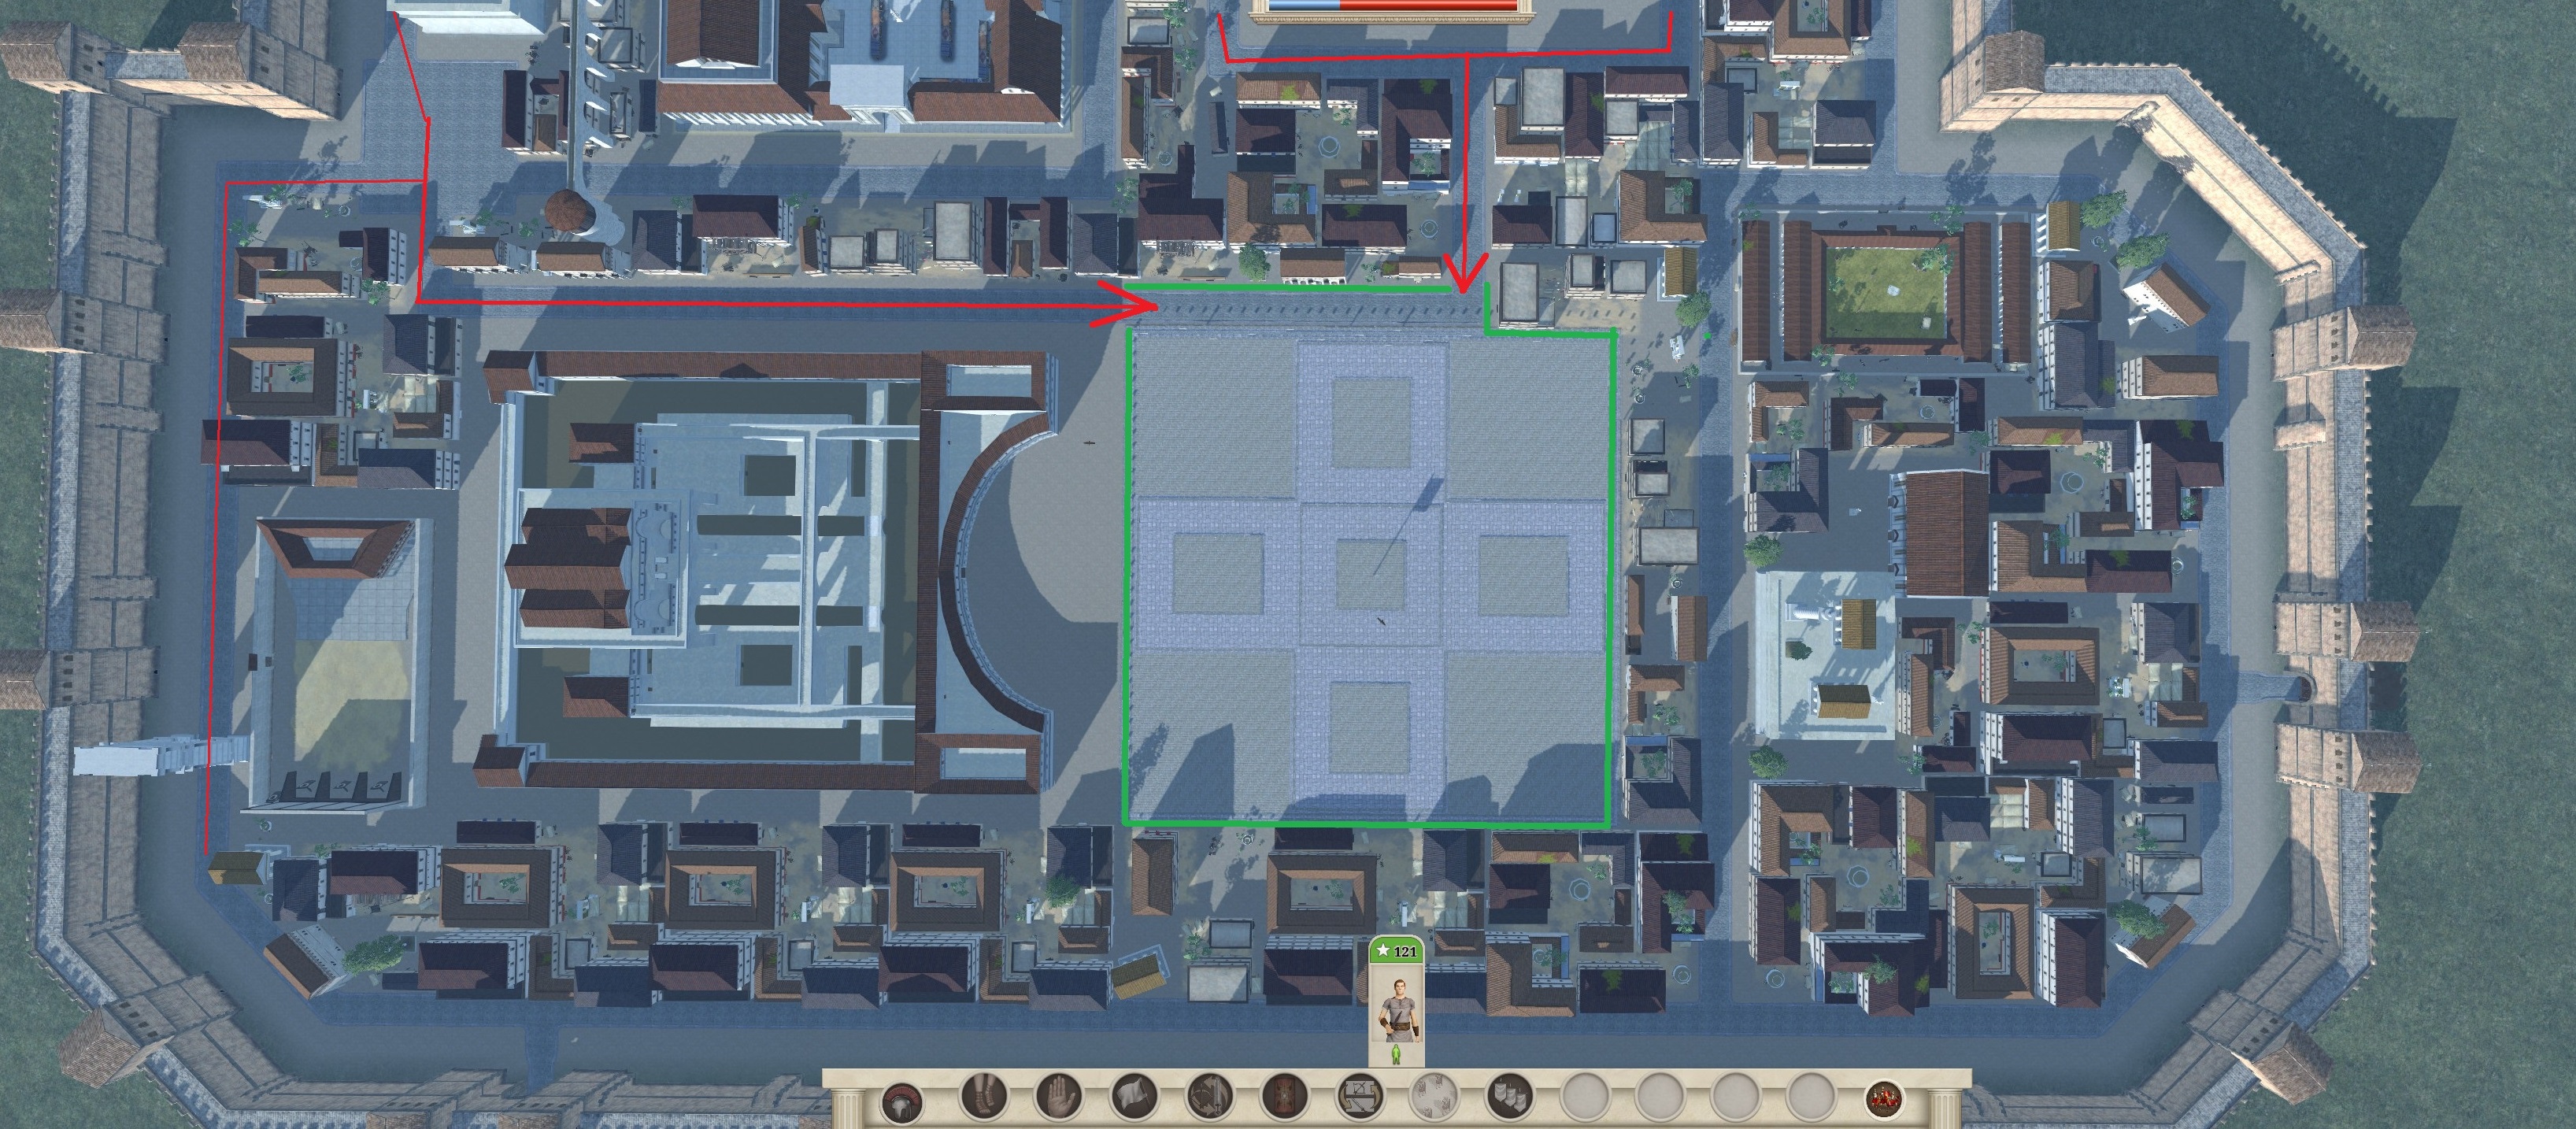 Total War: ROME REMASTERED Defense Guide for Romans and Greeks Strategy - City Level 4 square Layout vs City Level 5 square Layout - 9518087